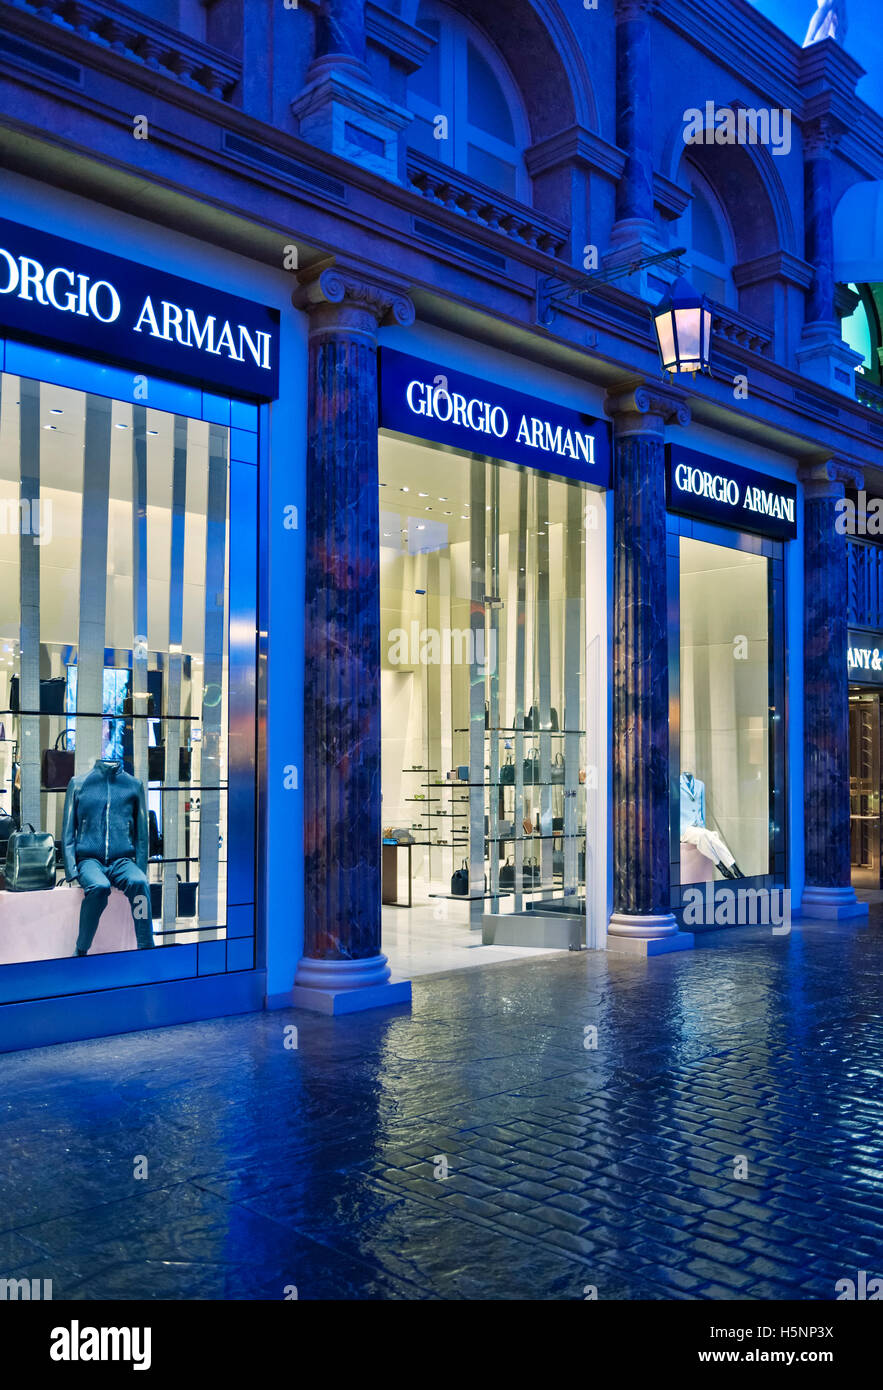 Giorgio Armani Retail Store in the Forum Shops in Caesars Palace Stock Photo